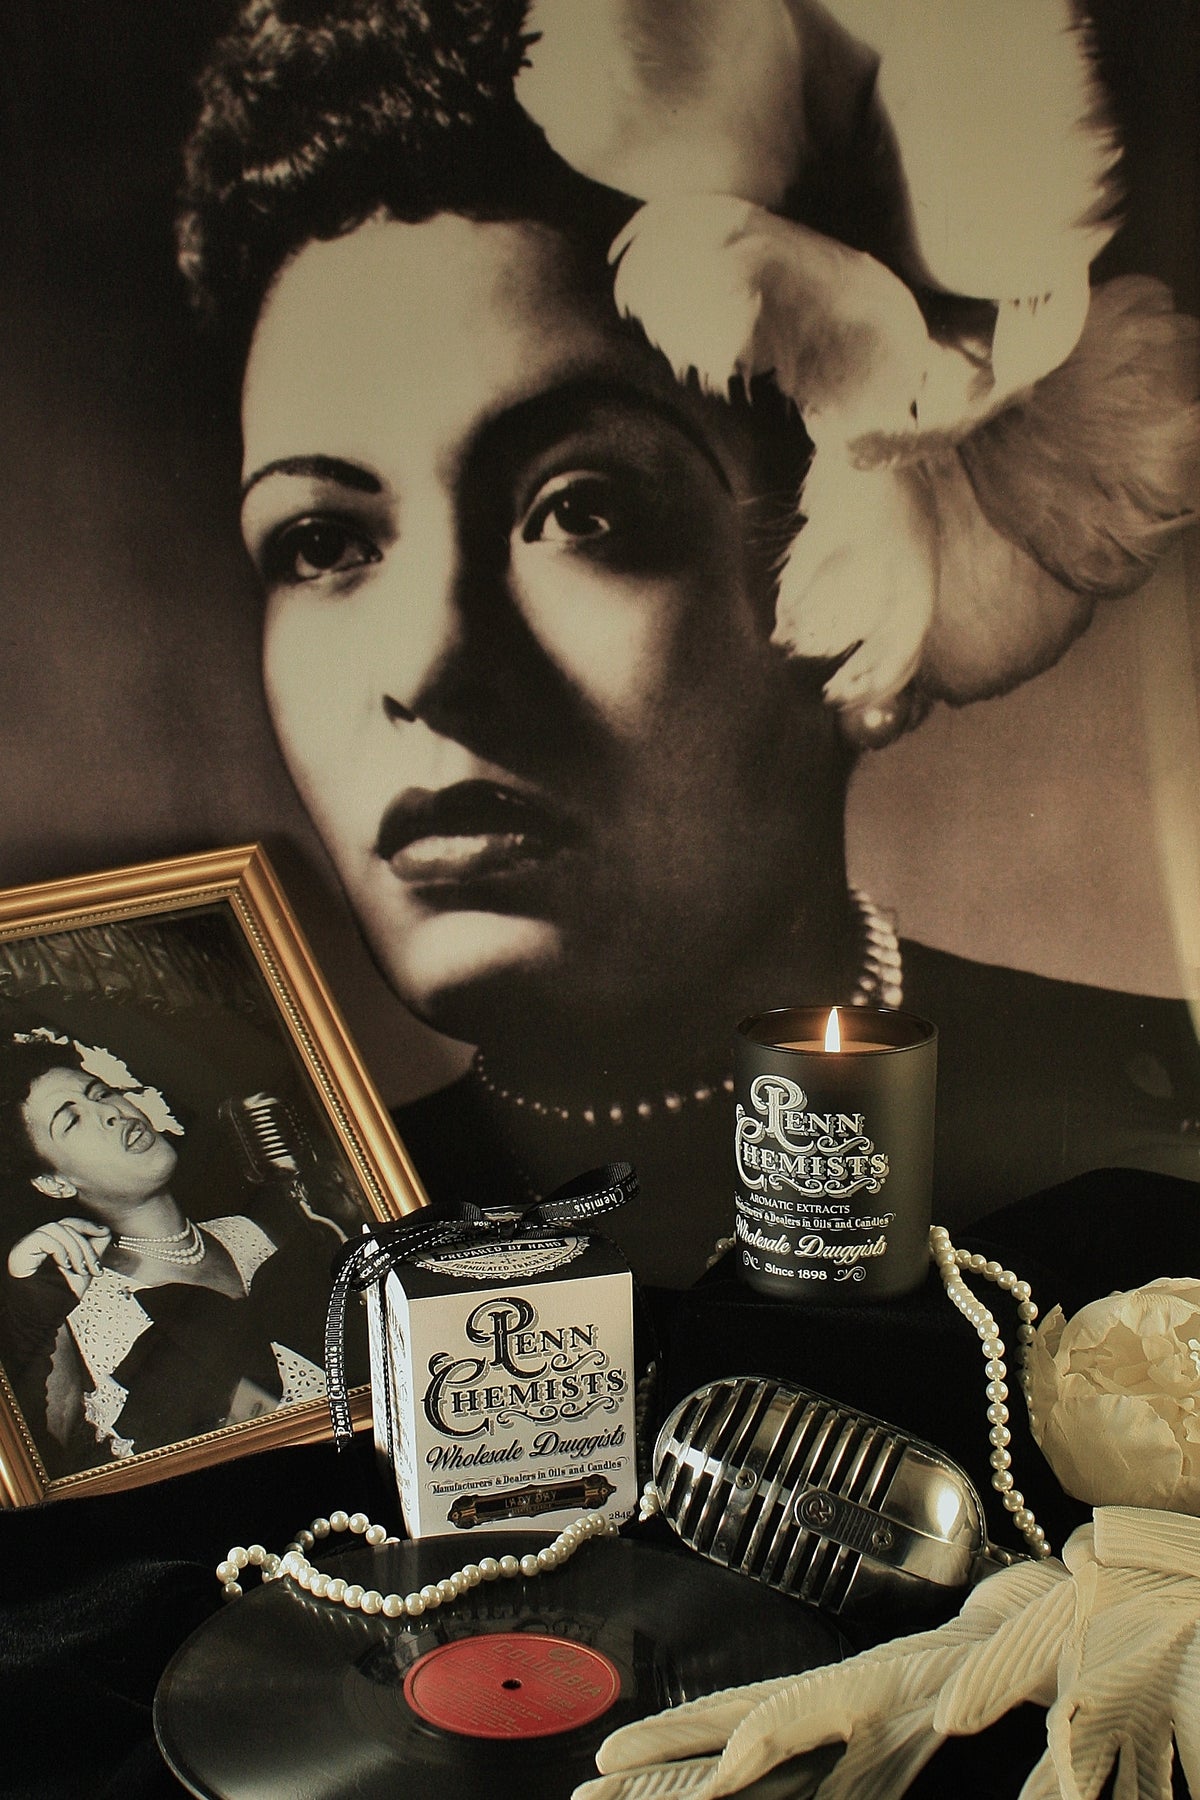 Vintage tribute setup featuring a large portrait of a classic film actress, surrounded by old-time accessories including a microphone, vinyl record, pearls, memorabilia, and a Penn Chemists Classic Candle - Lady Day.